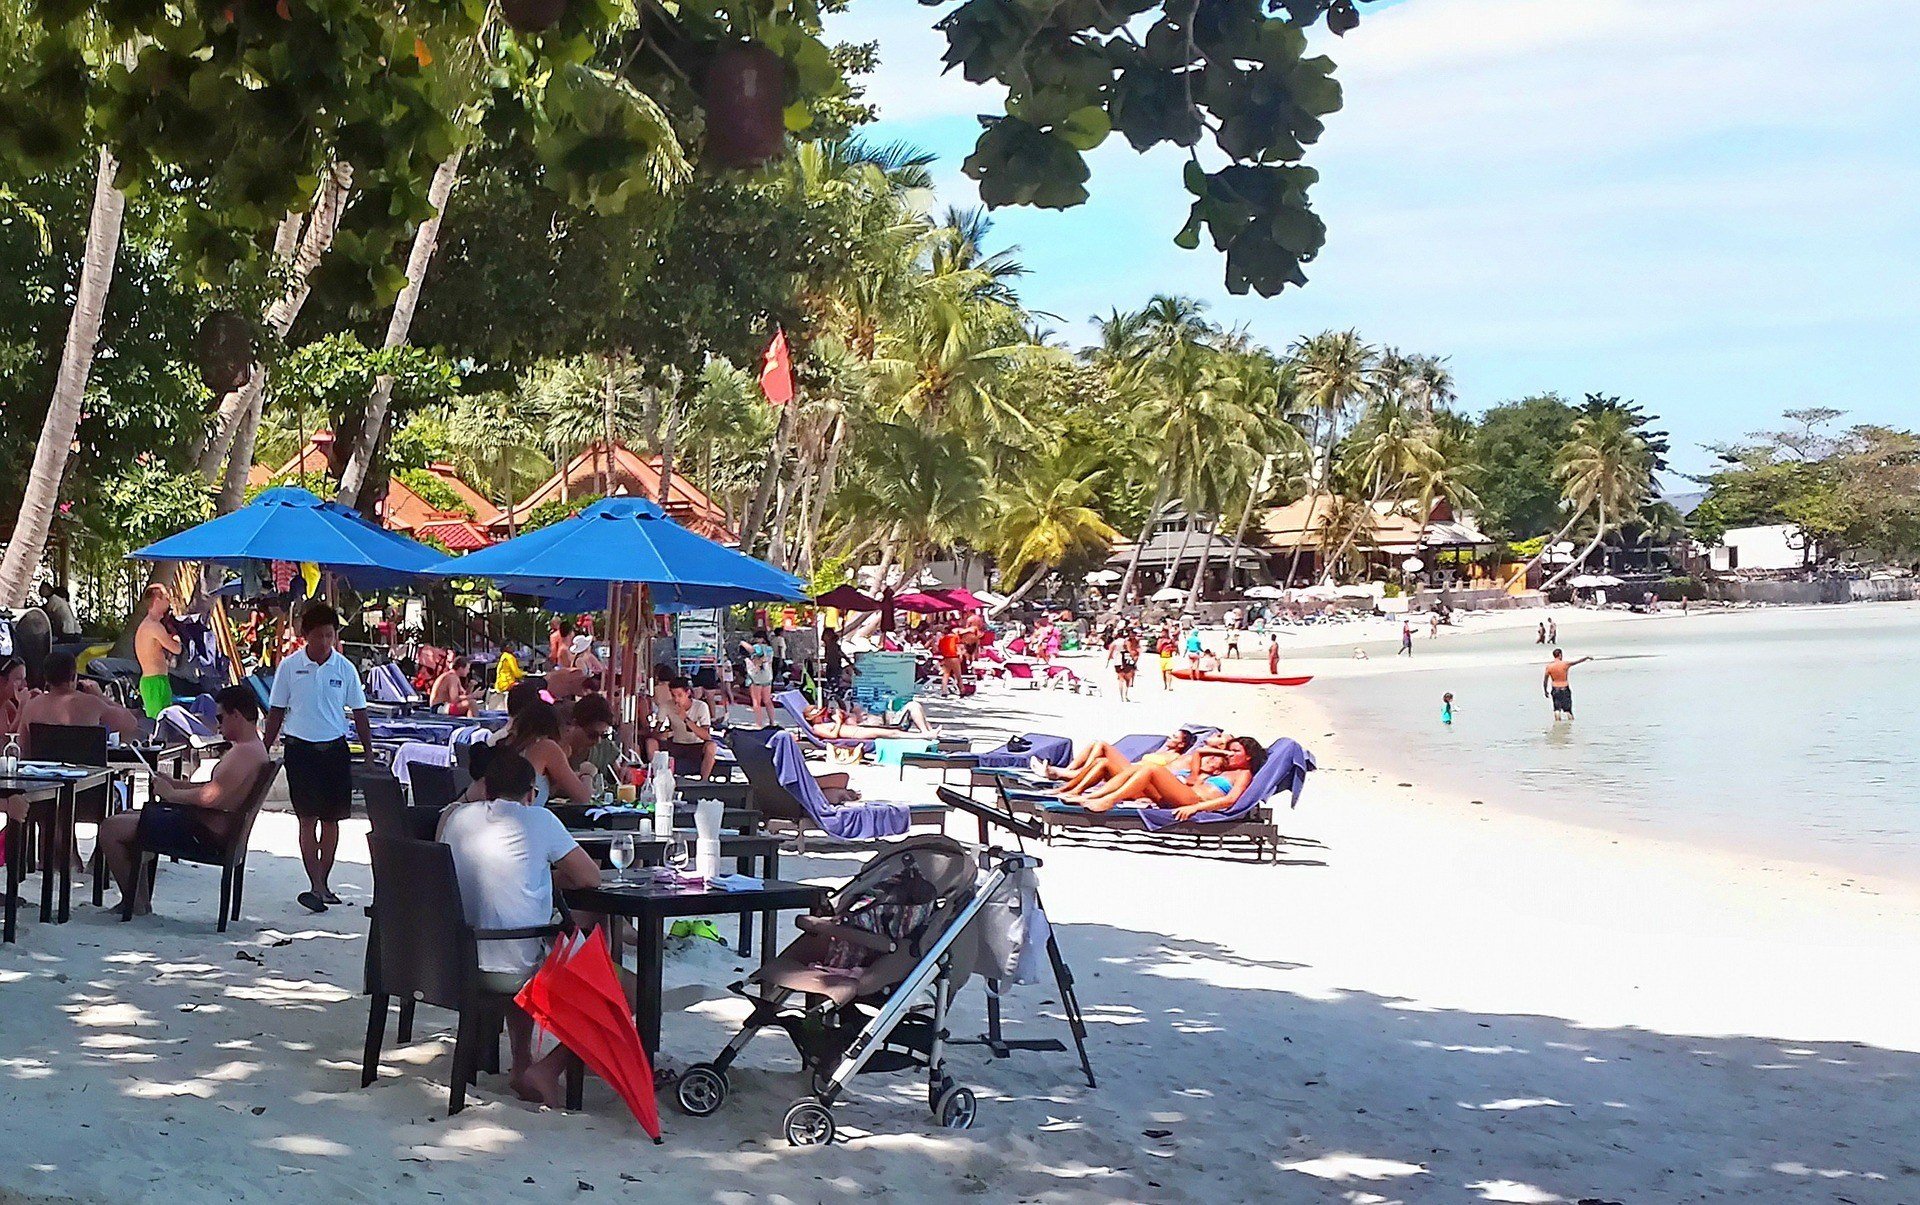 crowded beach as seen in Chaweng while staying in Koh Samui